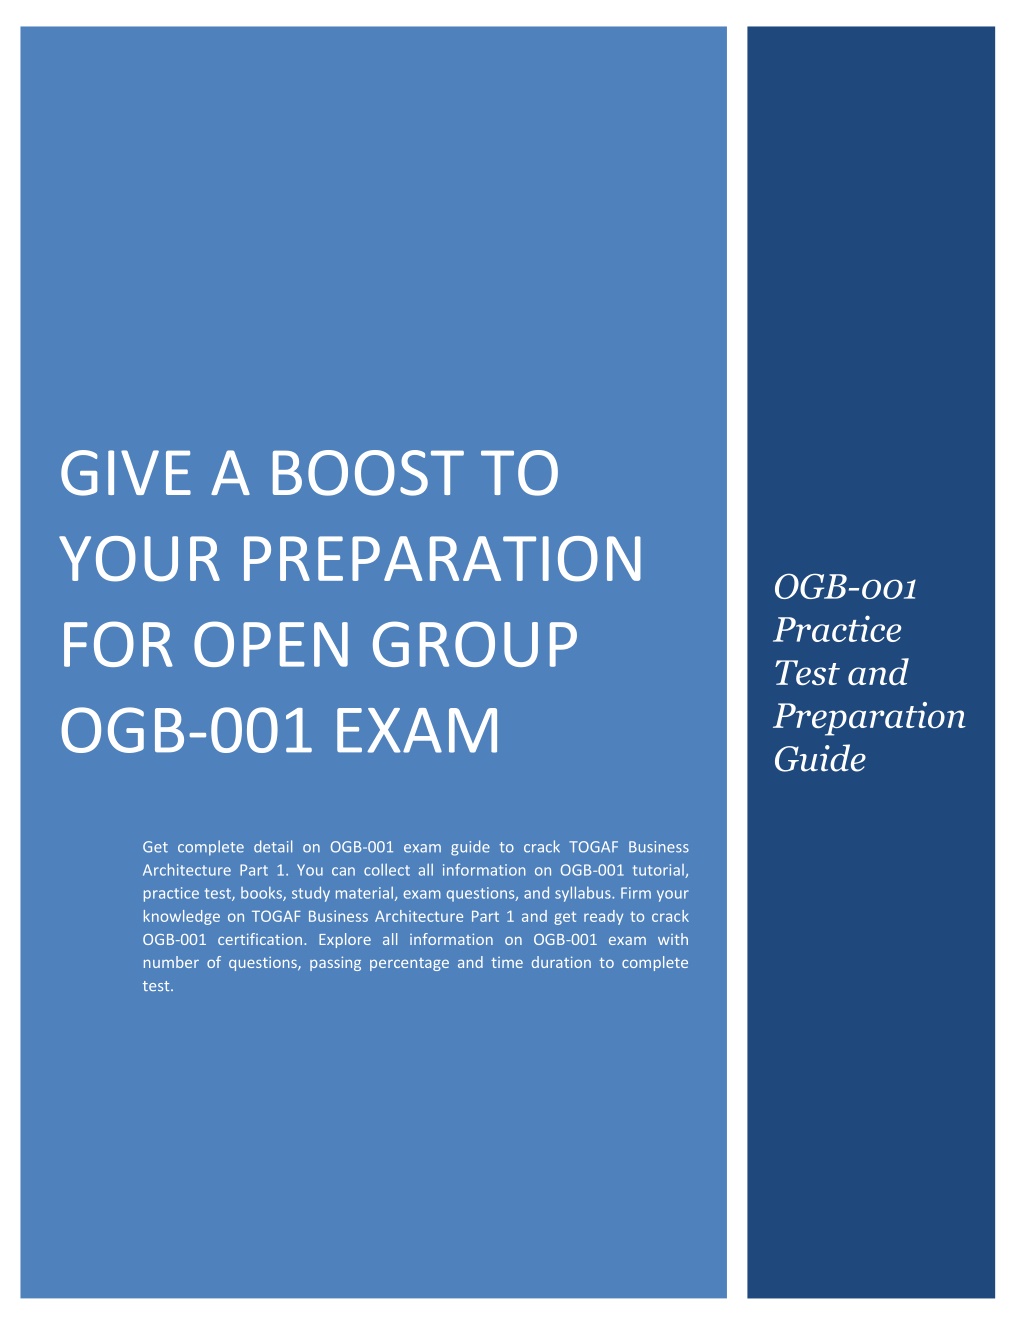 give a boost to your preparation for open group l.w